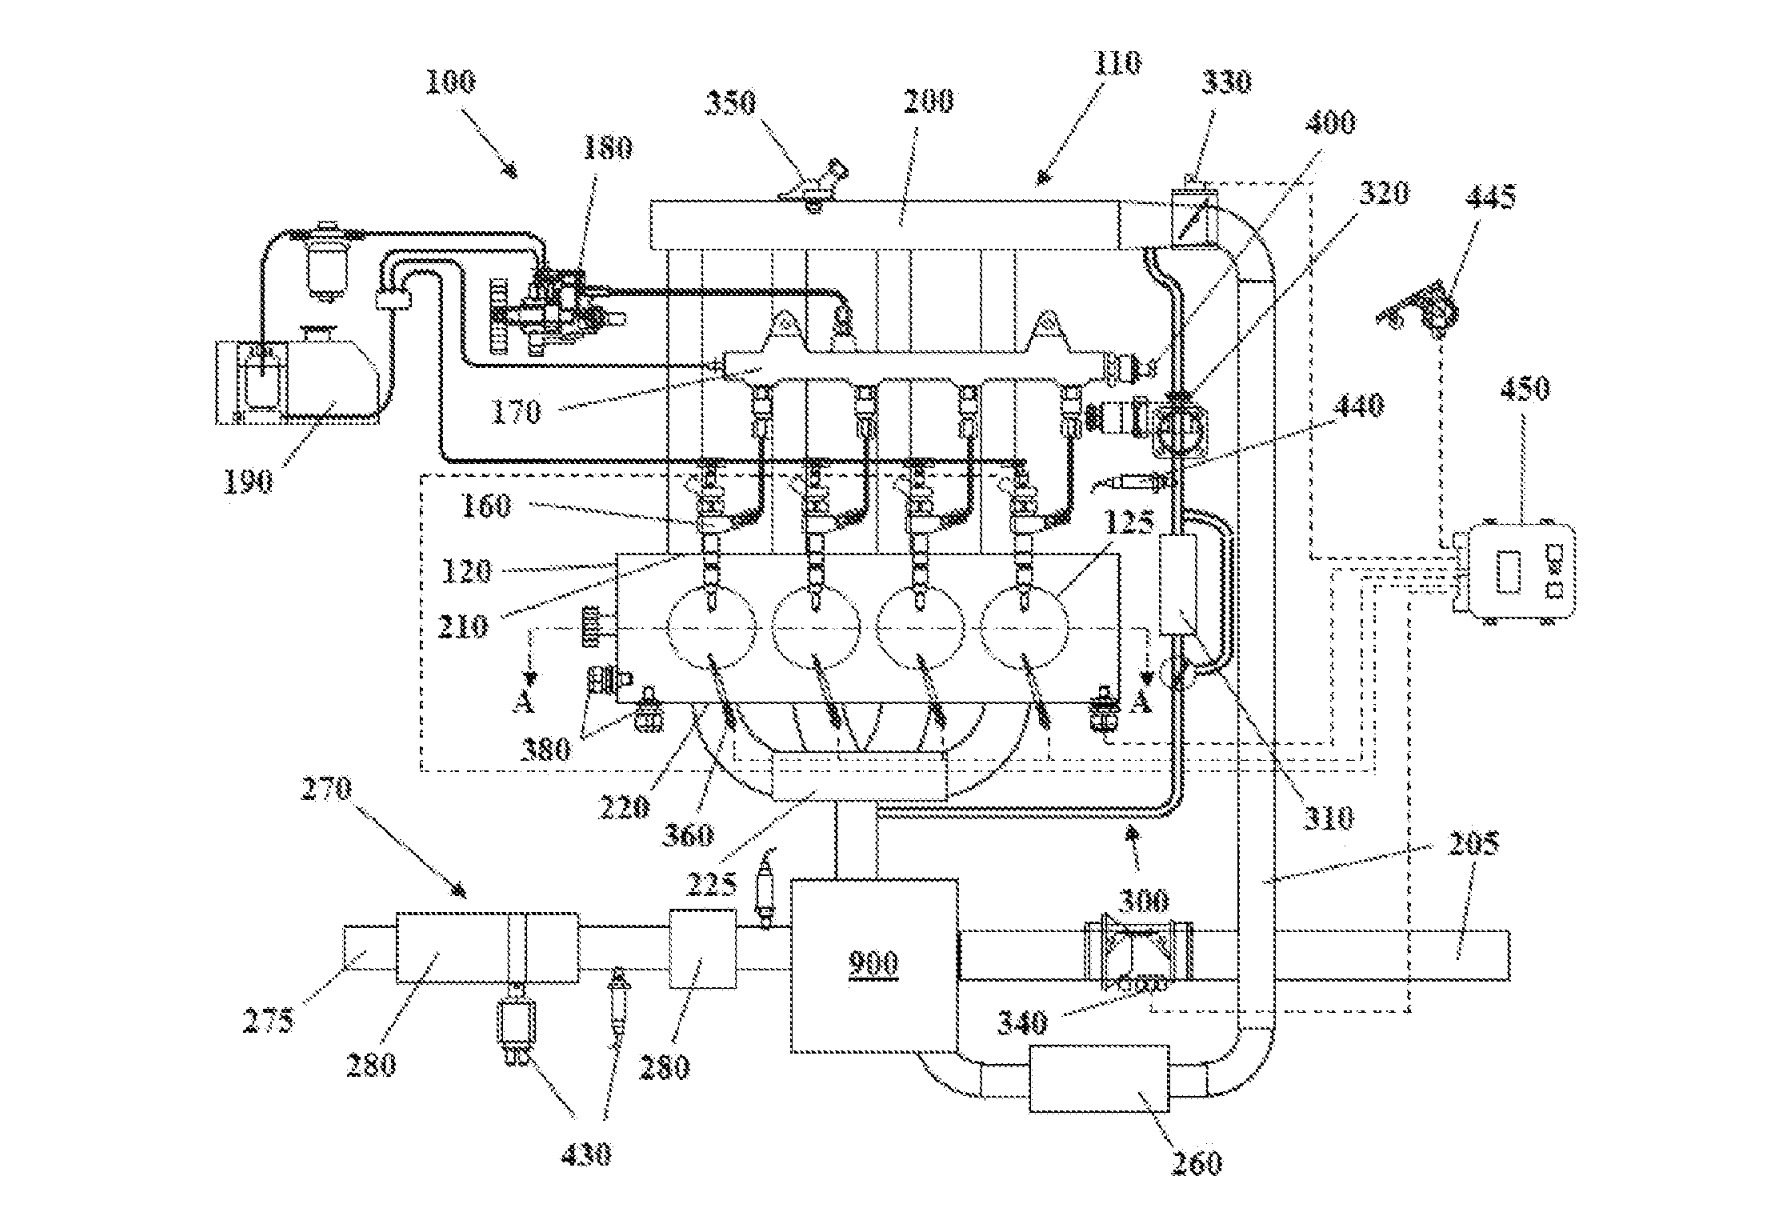 GM patents high- and low-pressure turbo technology